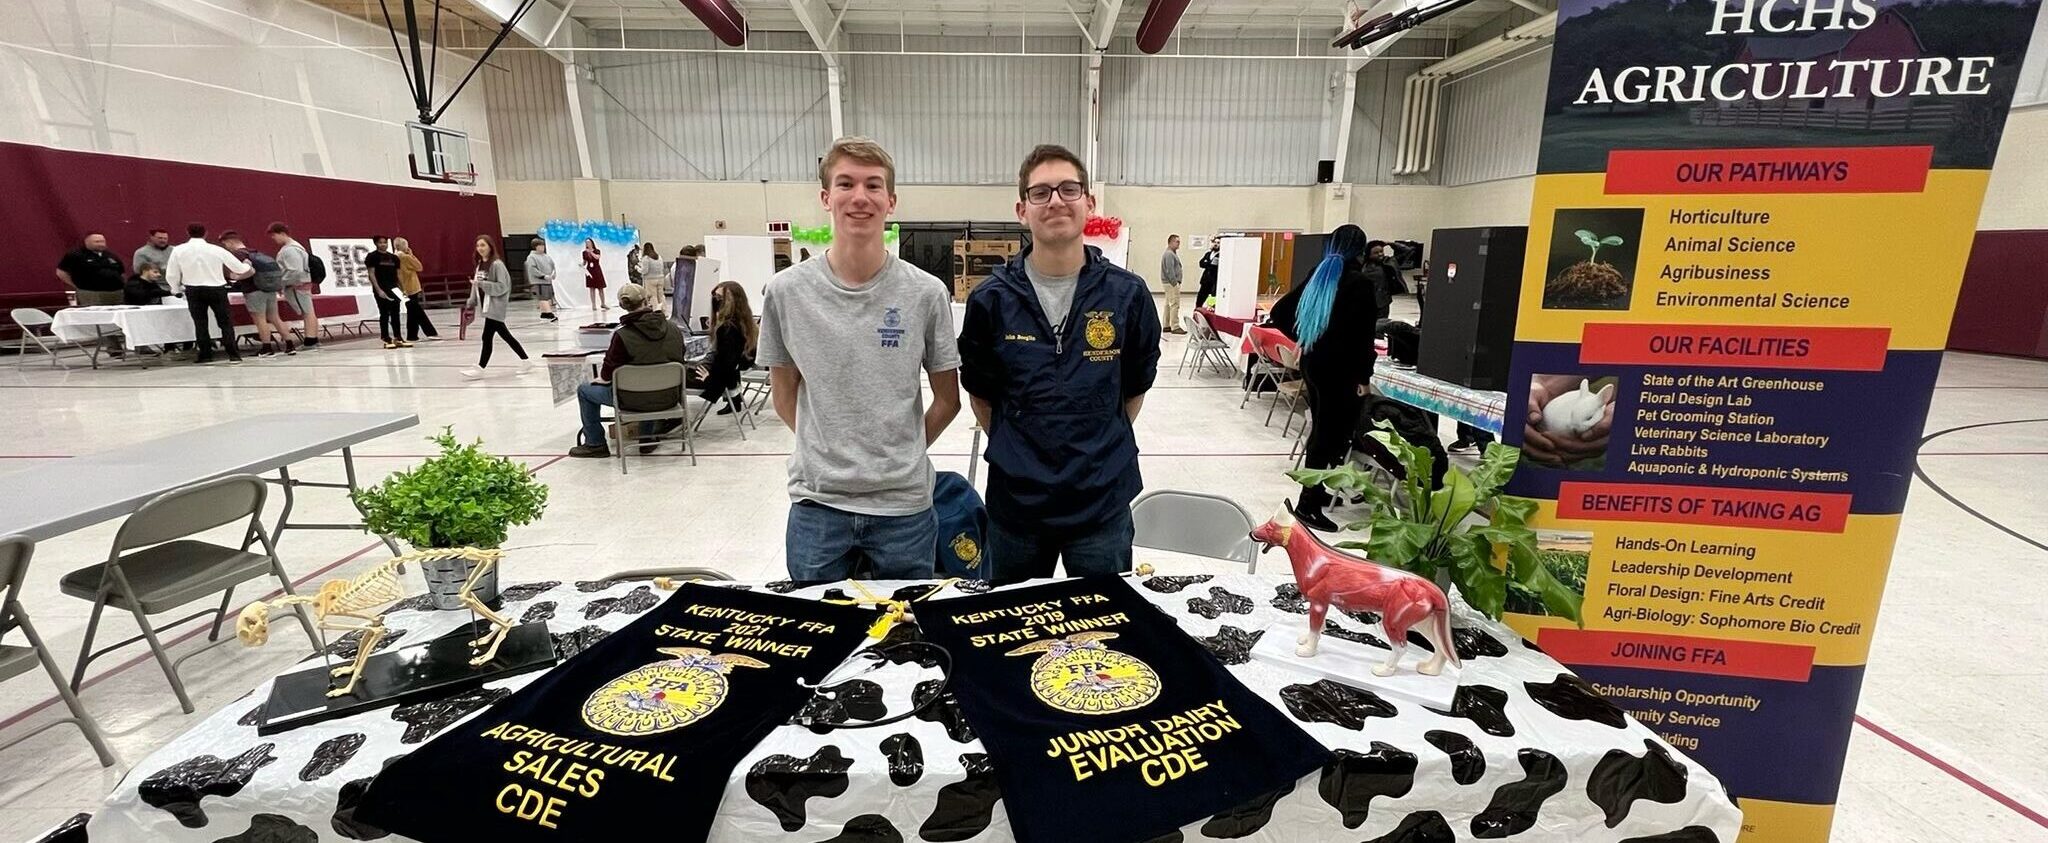 Agricultural Biology Club